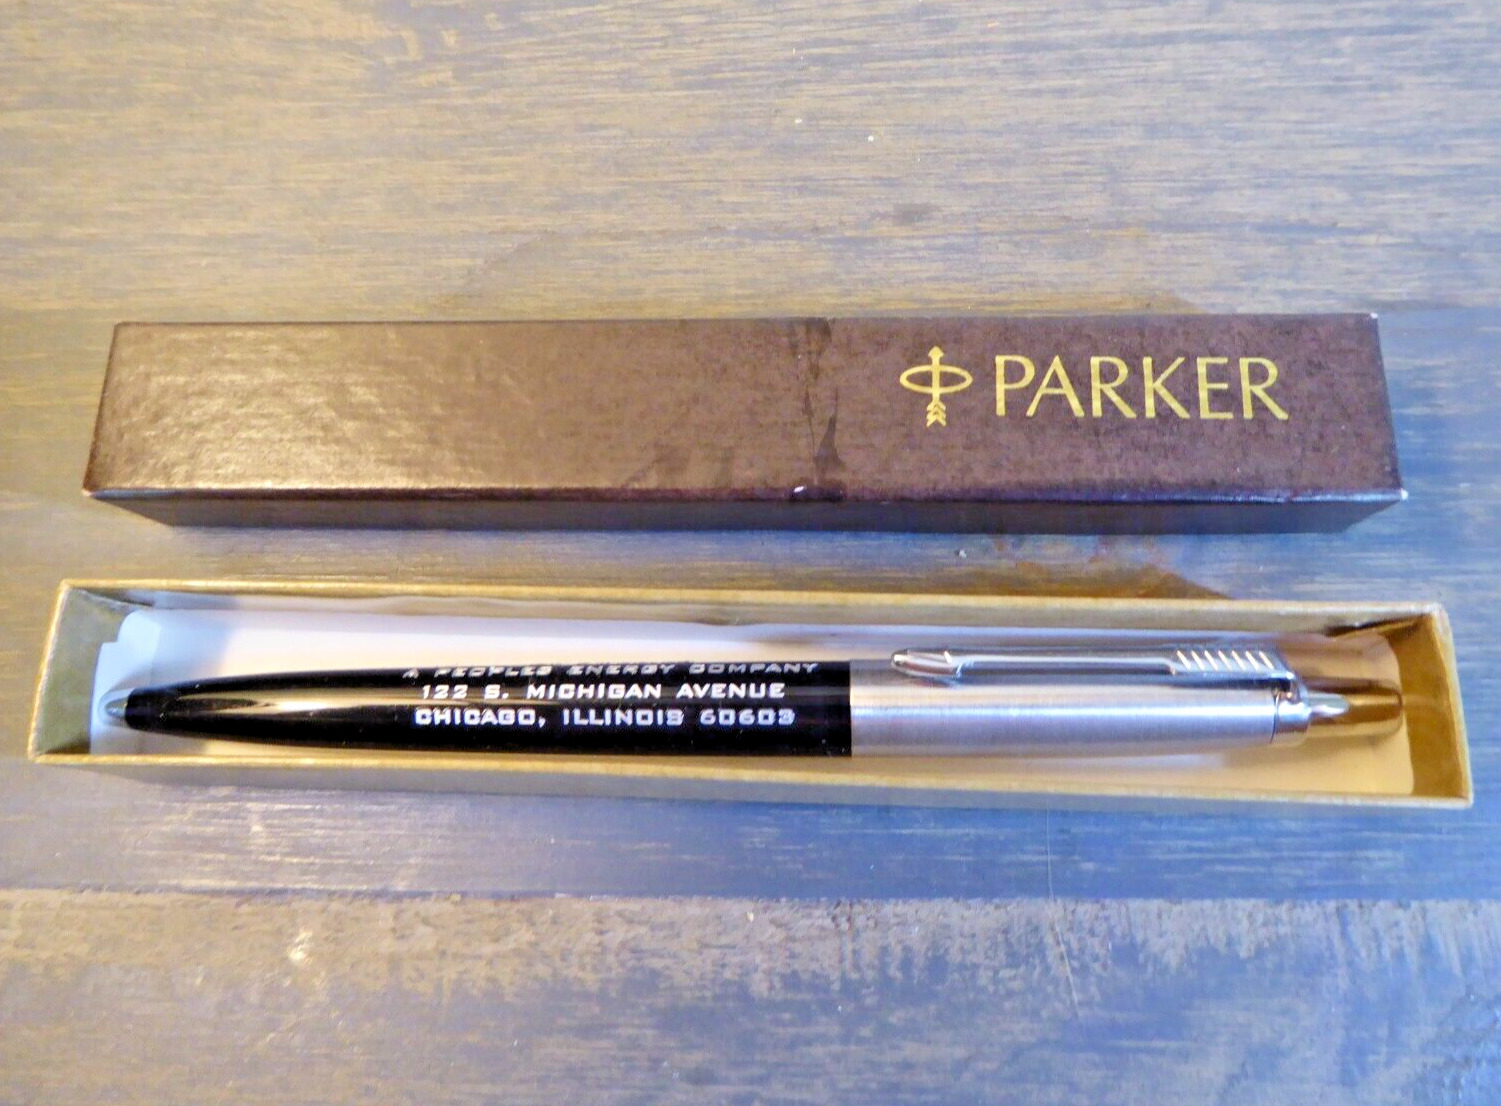 NOS Vintage 1979 Advertising Parker Pen Natural Gas Pipeline Company of America